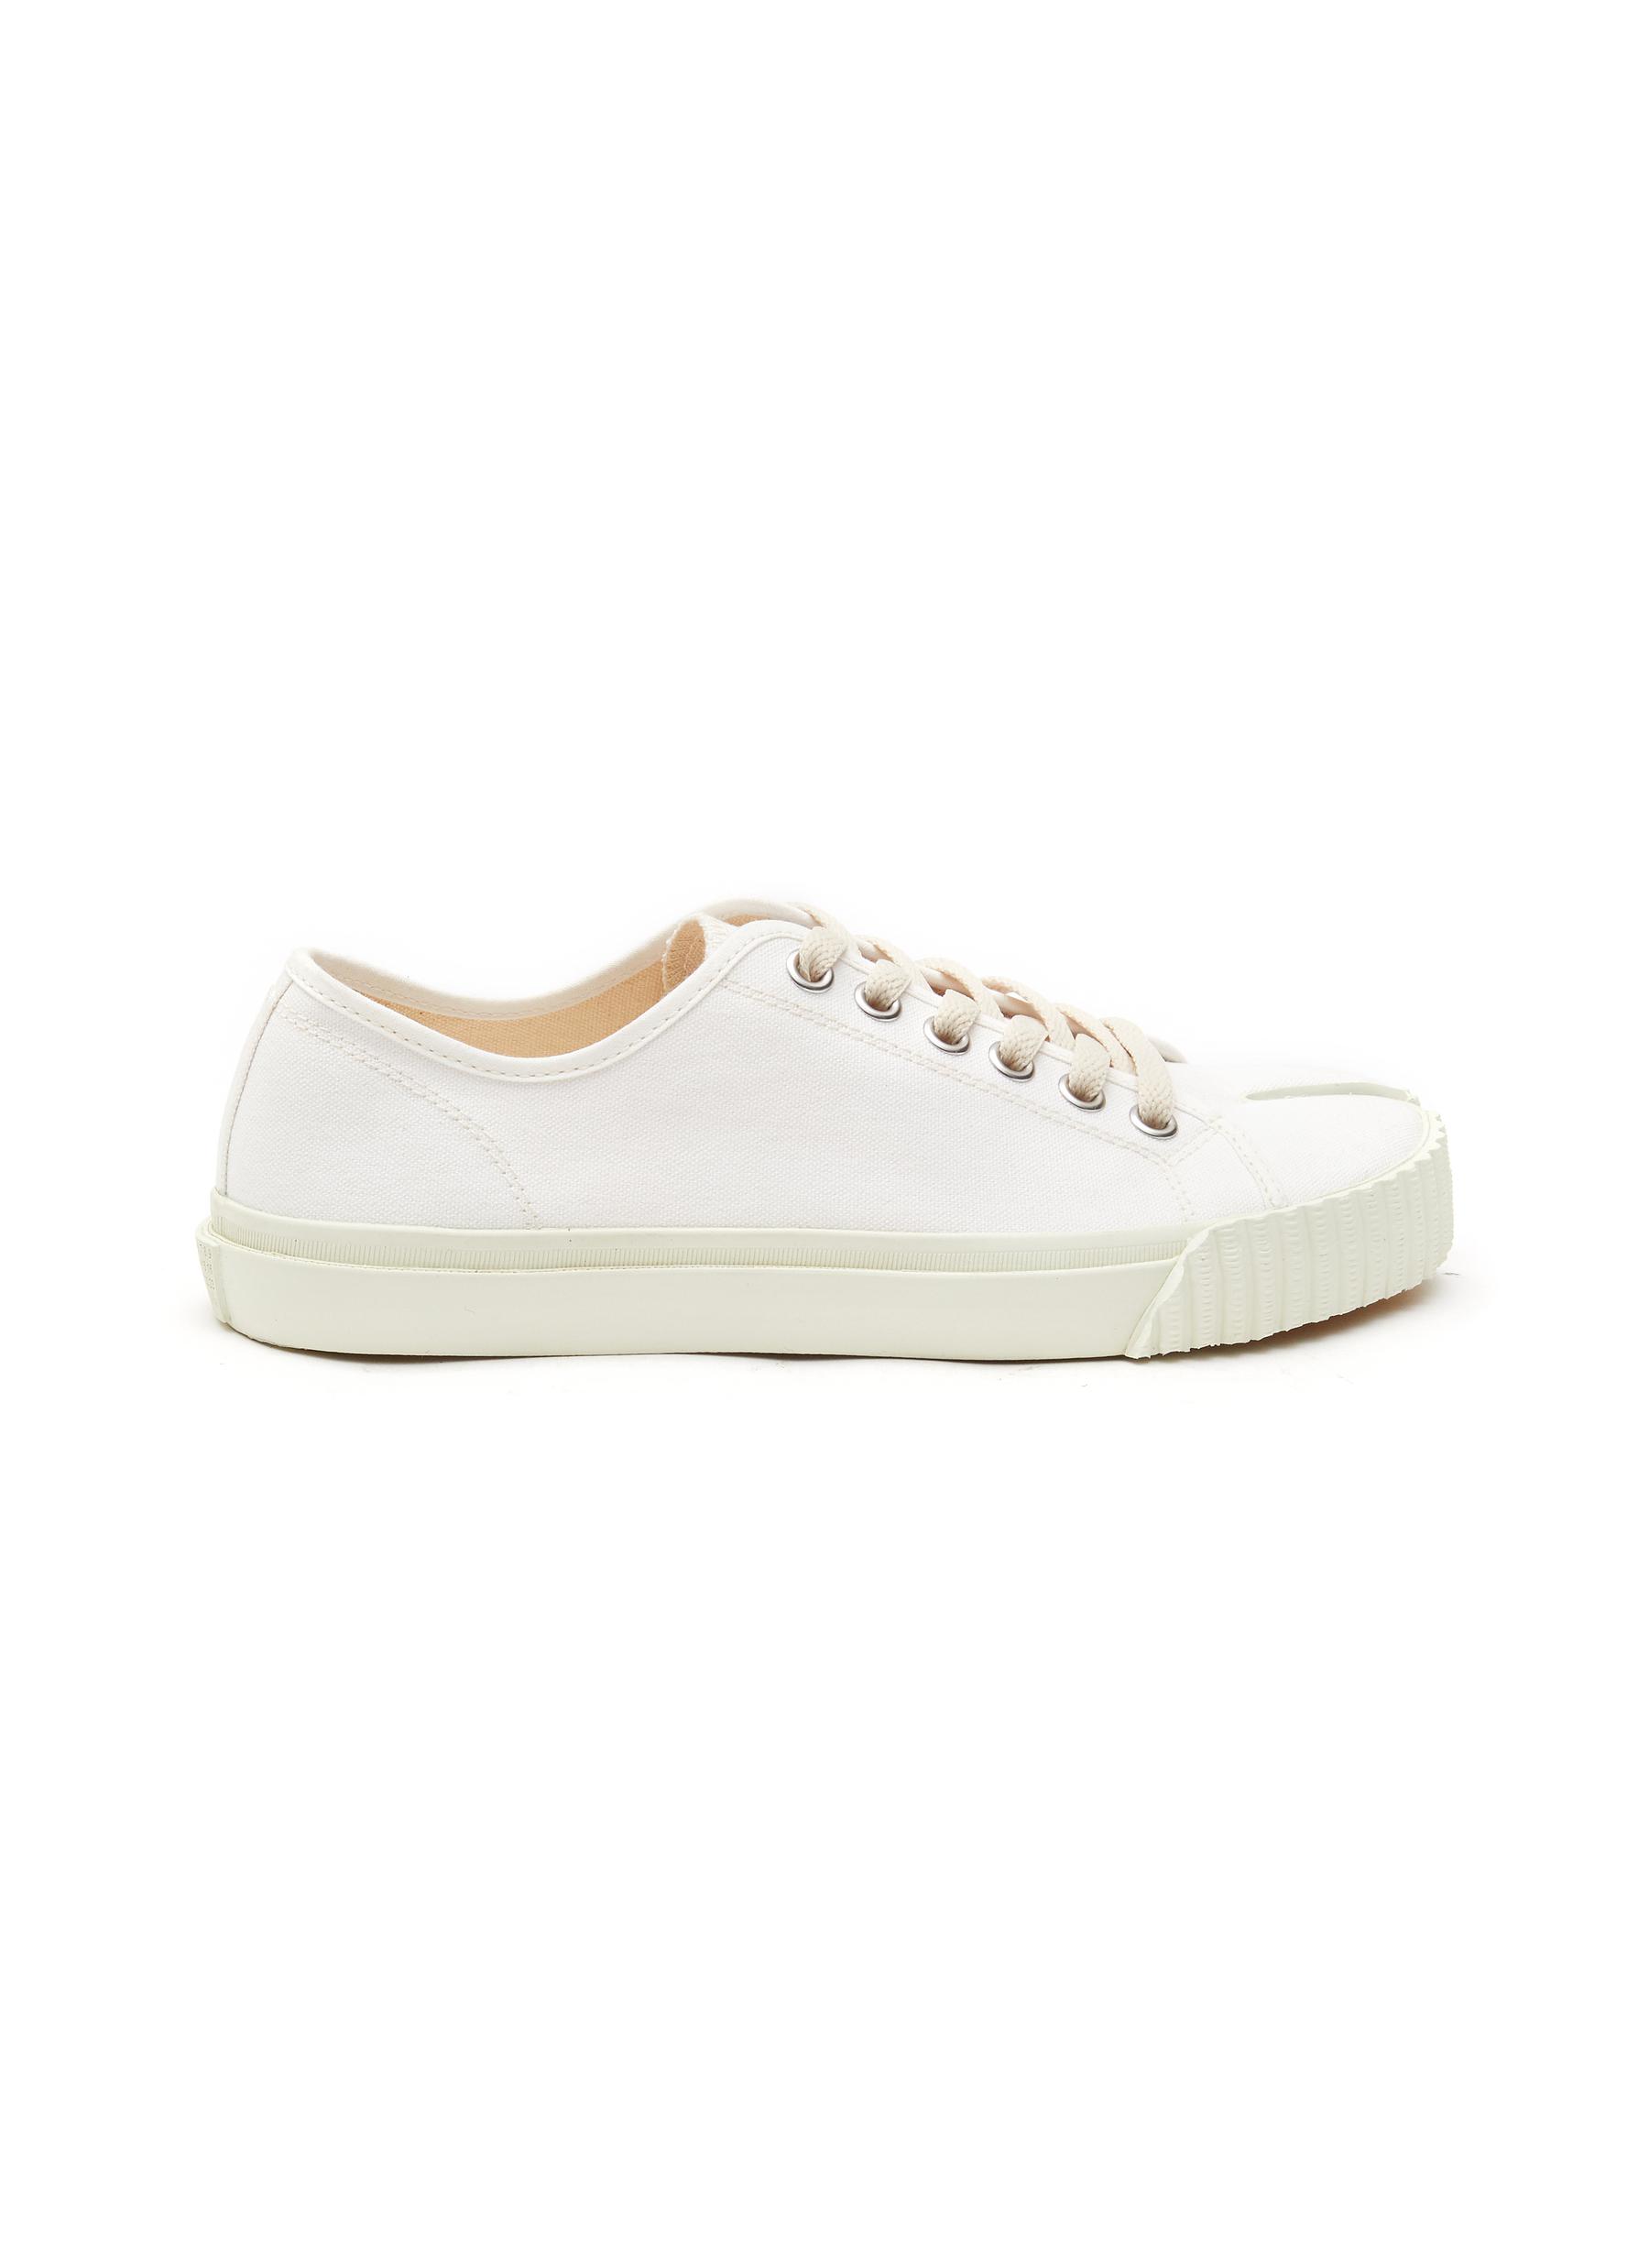 'Tabi' Canvas Low-Top Lace-Up Sneakers